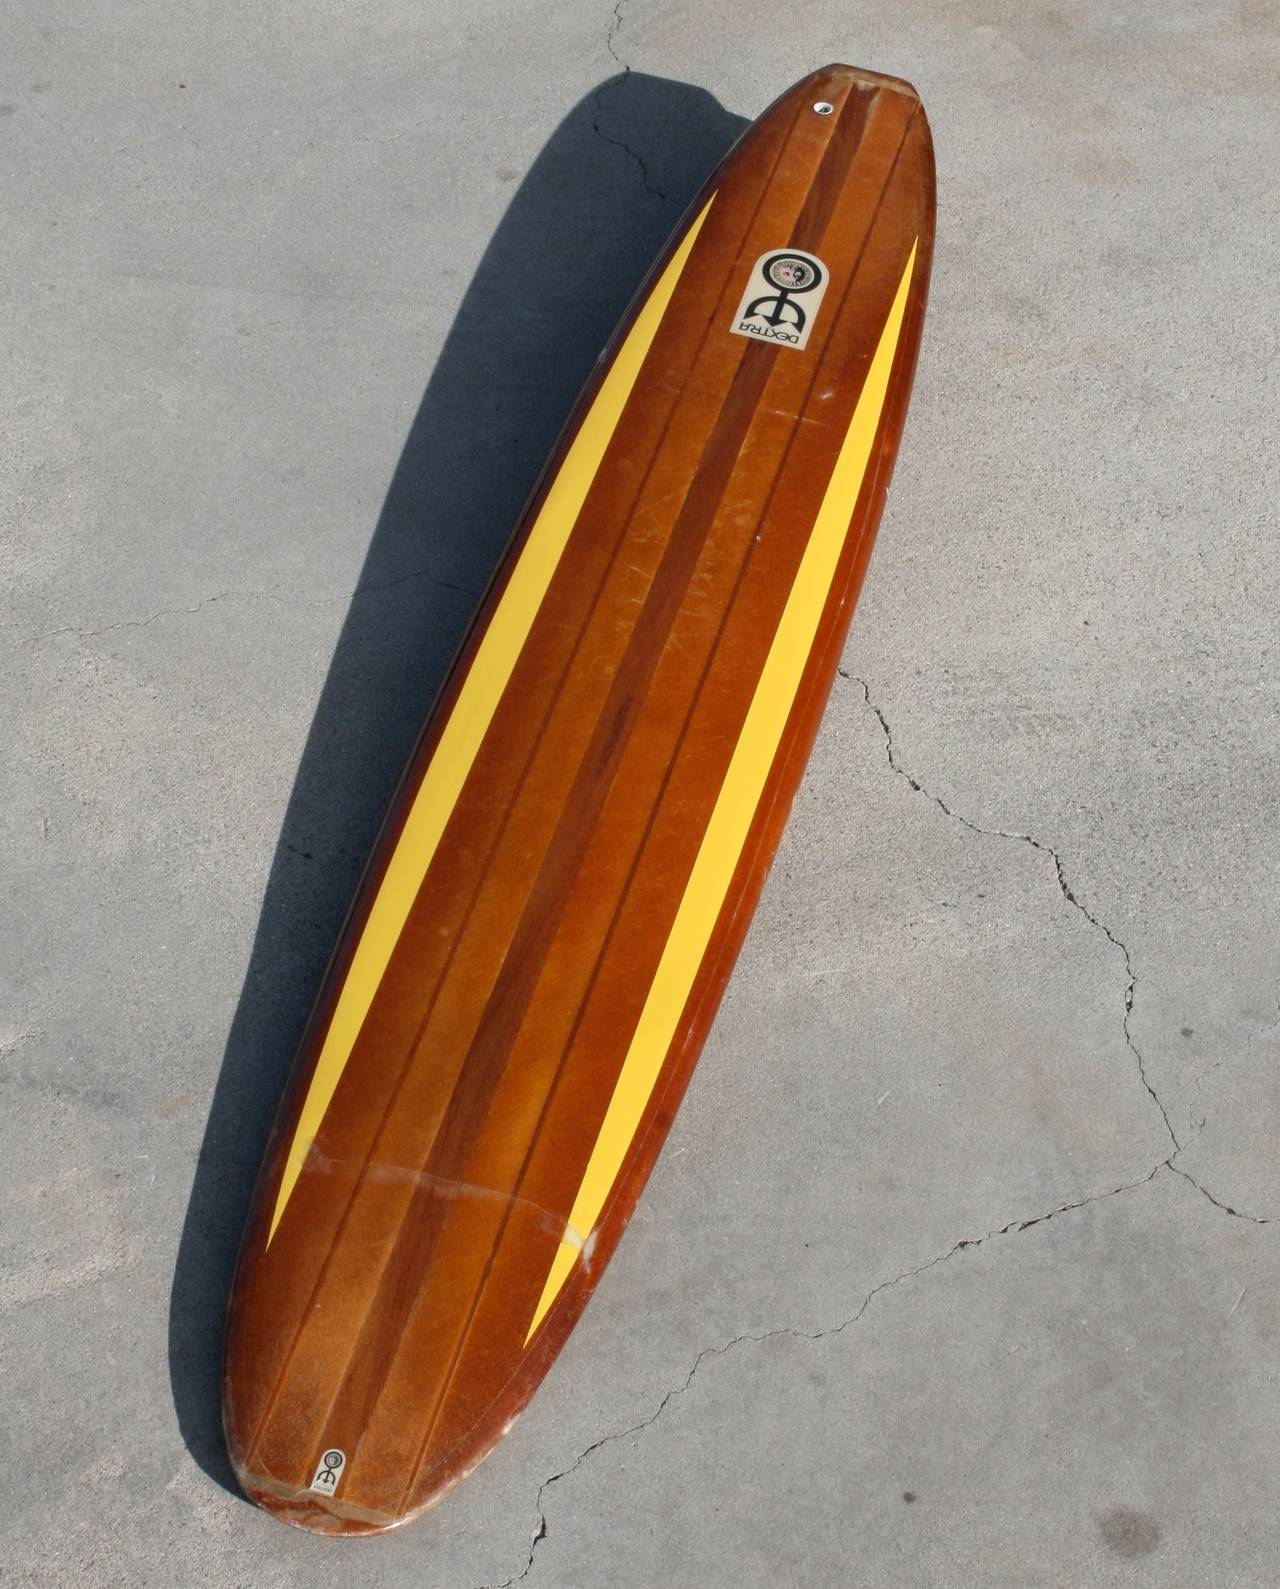 This 1960s Dextra surfboard is a true and glorious survivor: it carries some surf scars that have all been repaired, a patina only achieved with age and the presence and soul of its' creator.  The 2